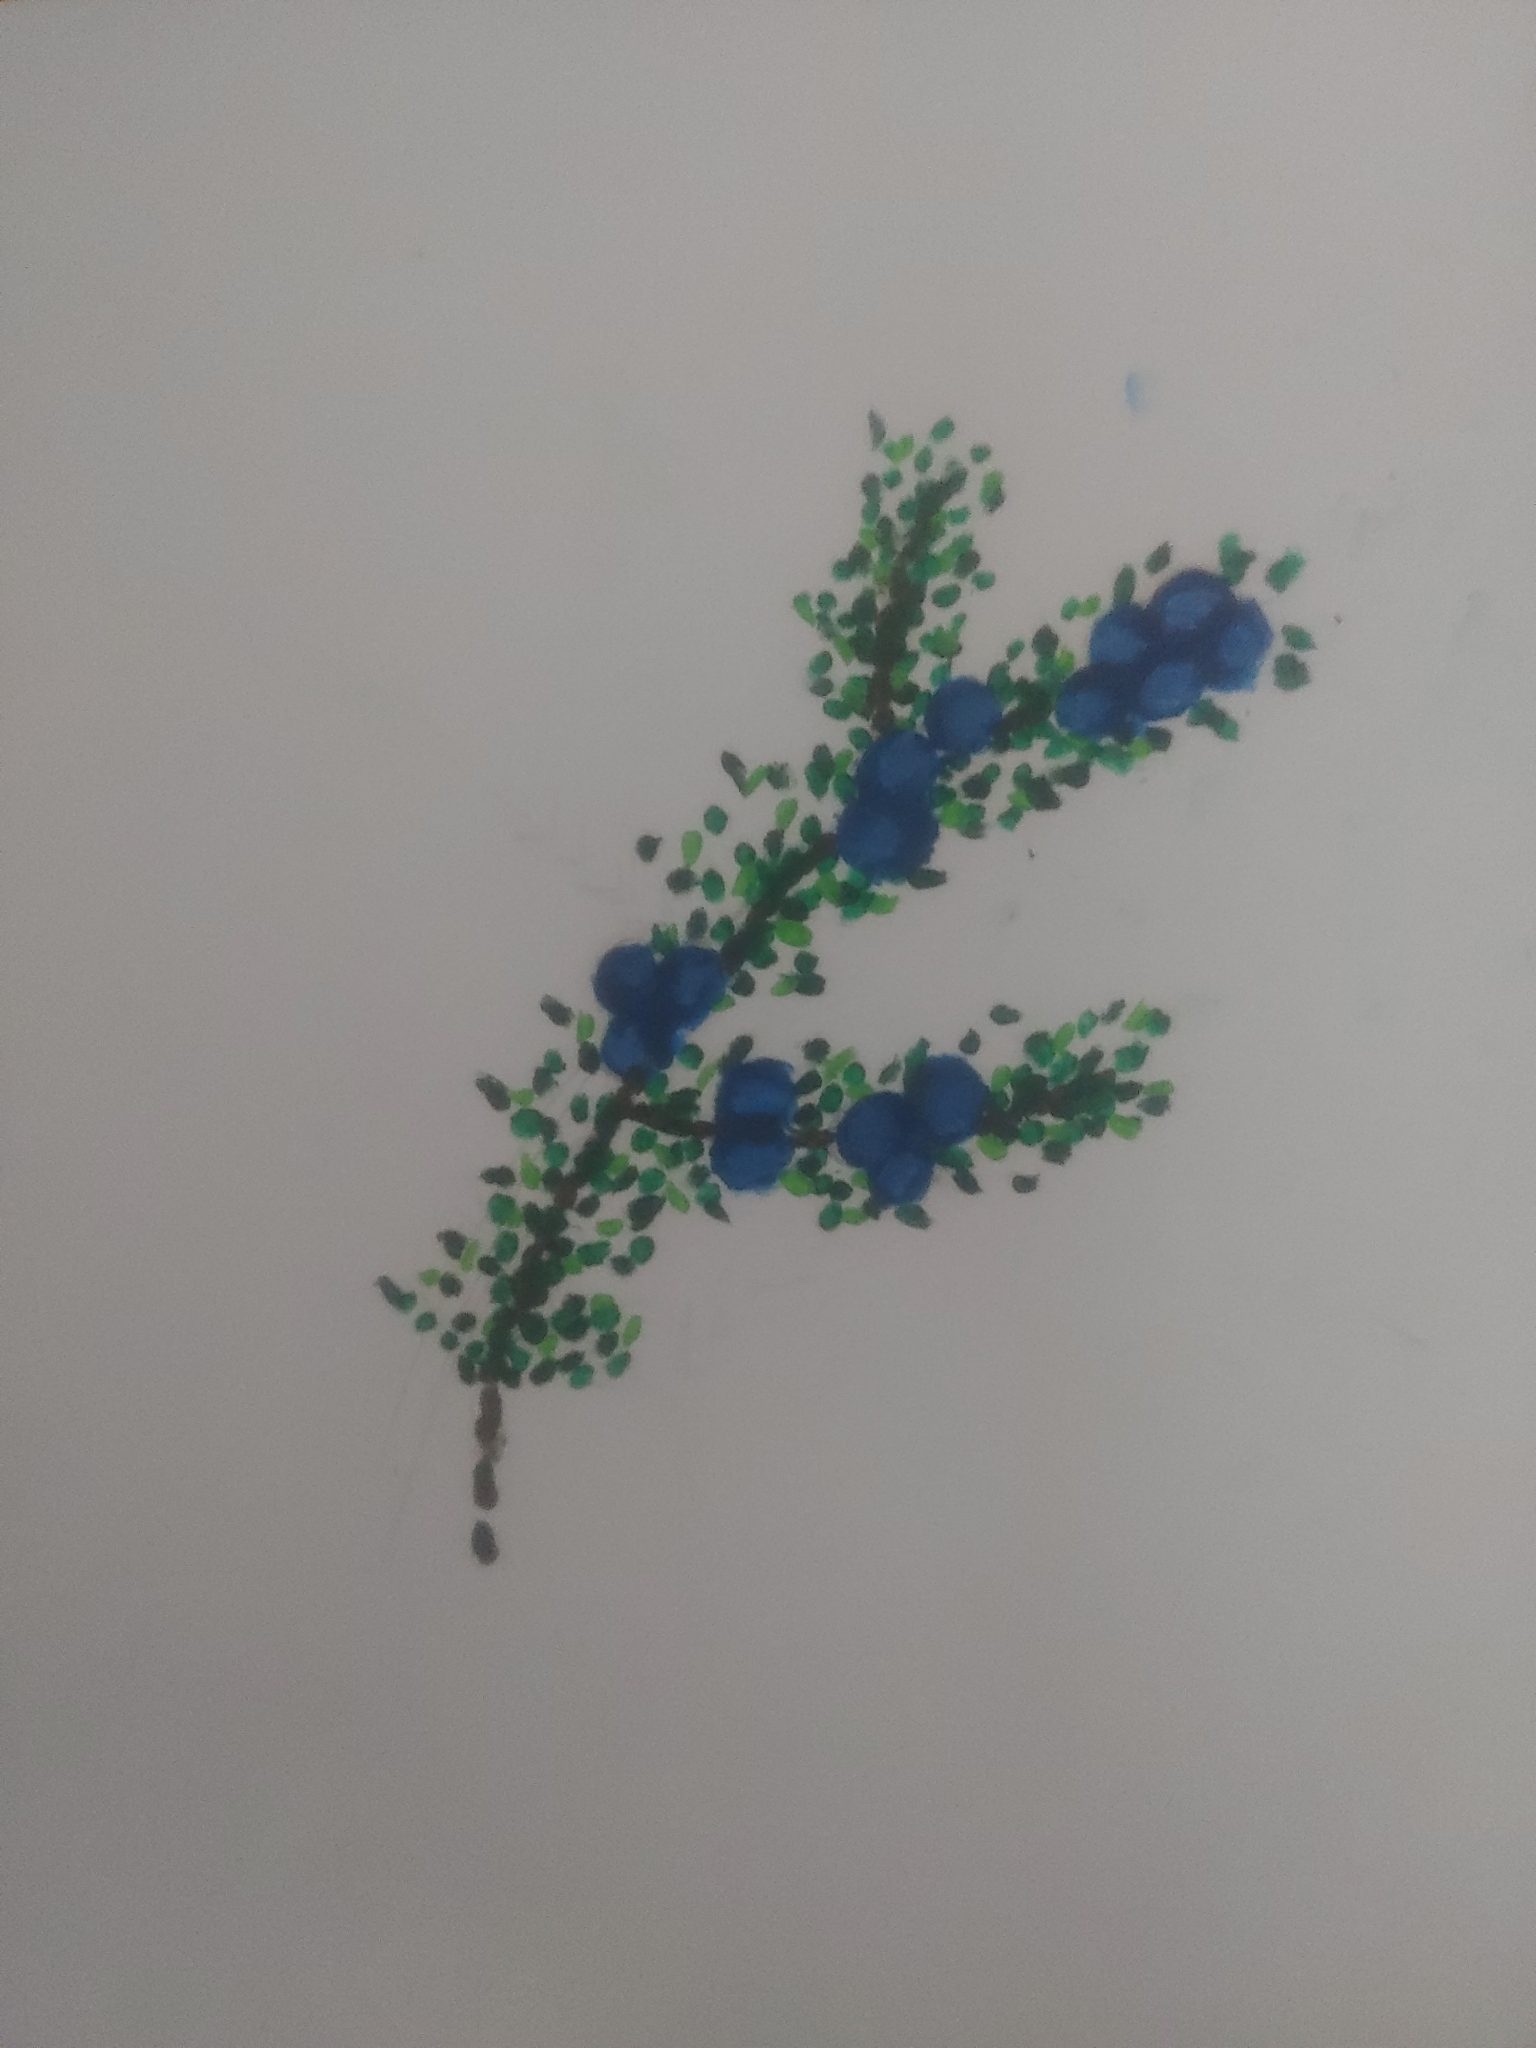 A close up of a juniper plant that is made using paint dots. The photo has green dots for the leaves and large blue dots for the juniper berries.